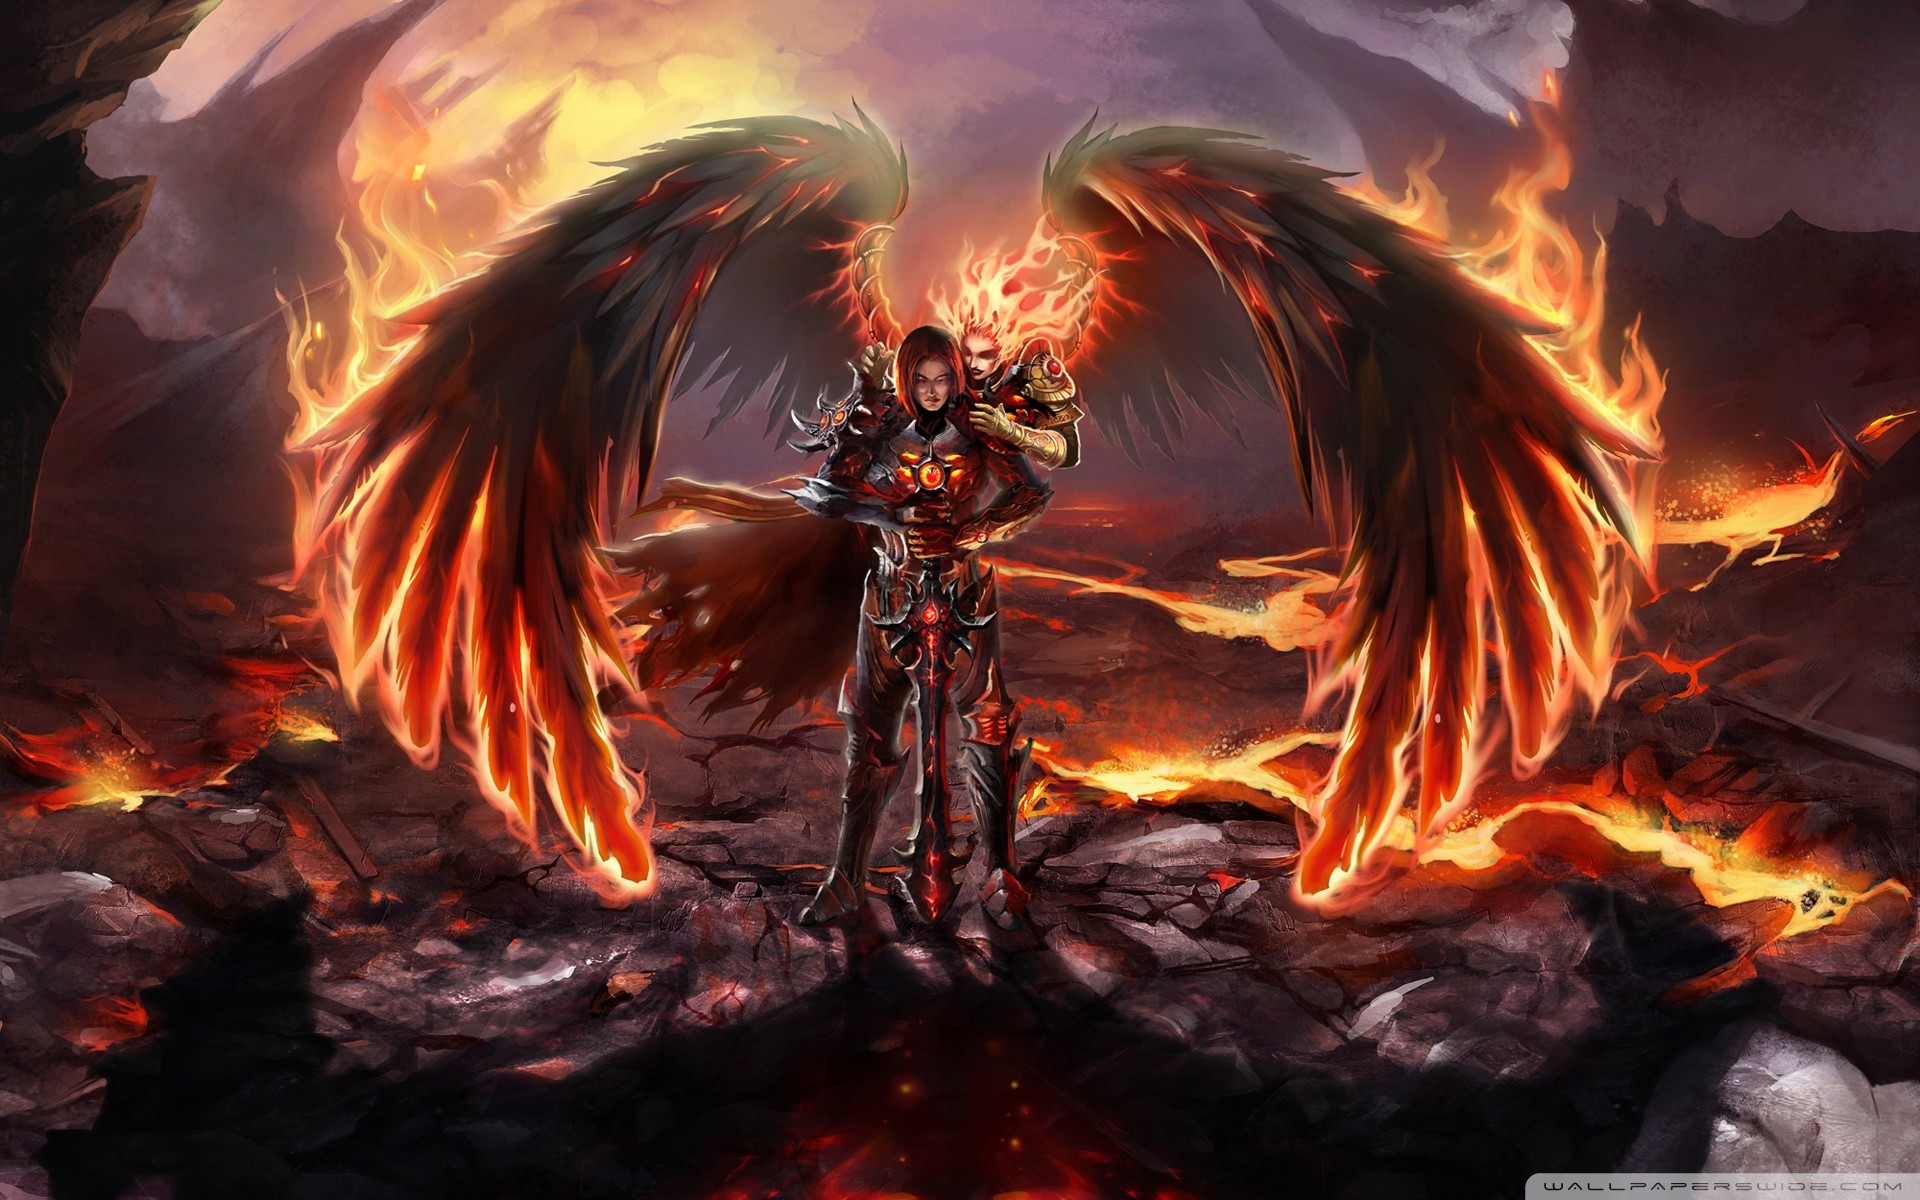 Badass Angel Anime Wallpapers with High Definition Resolution px 731.47 KB